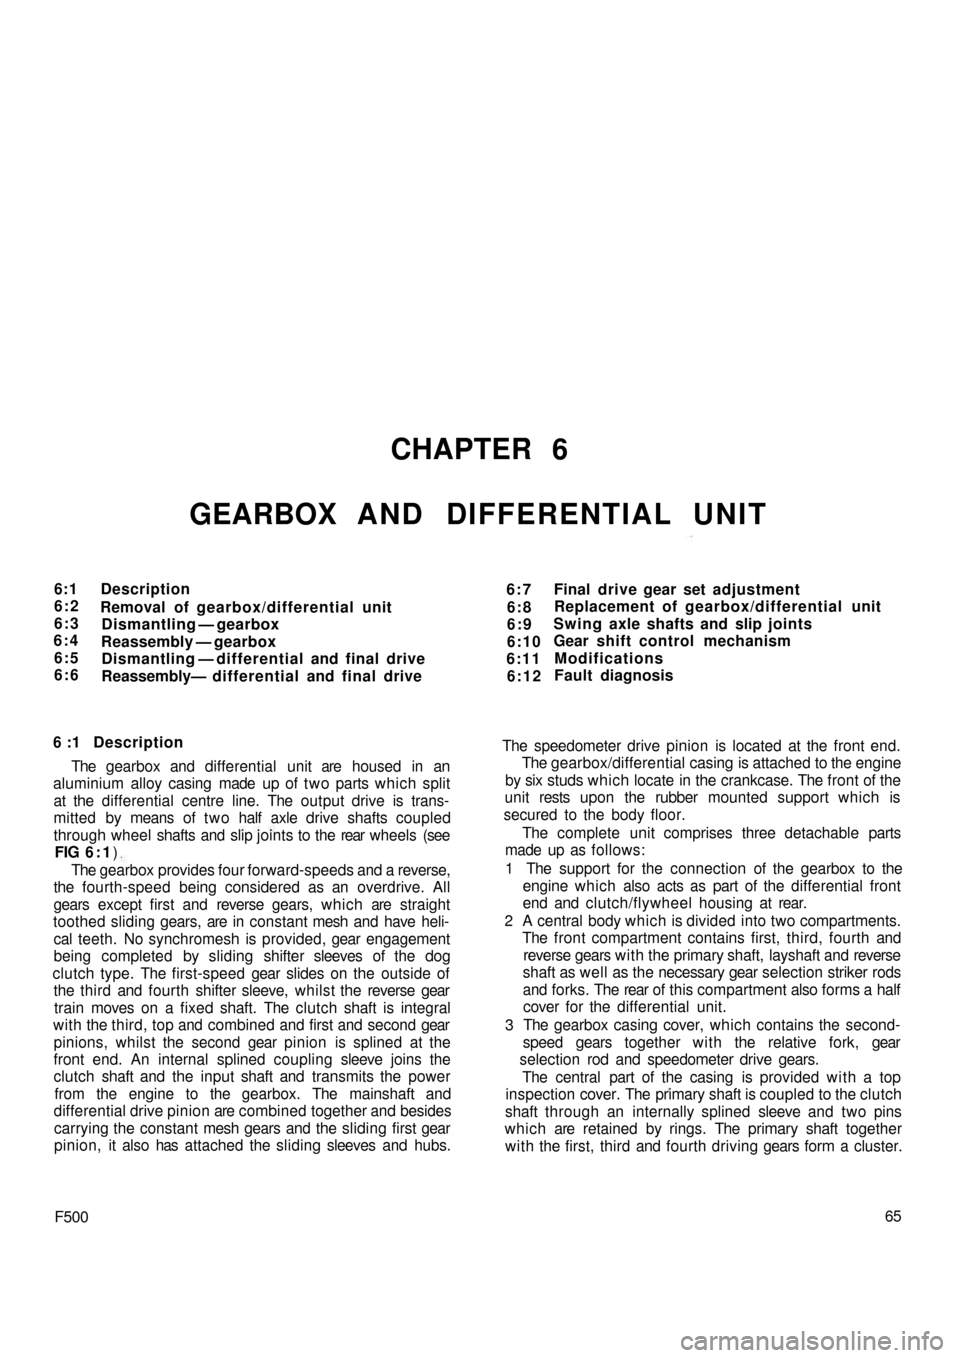 FIAT 500 1971 1.G Repair Manual CHAPTER 6
GEARBOX AND DIFFERENTIAL UNIT
6:1
6:2
6:3
6:4
6:5
6:6Description
Removal of gearbox/differential unit
Dismantling — gearbox
Reassembly — gearbox
Dismantling — differential and final dr